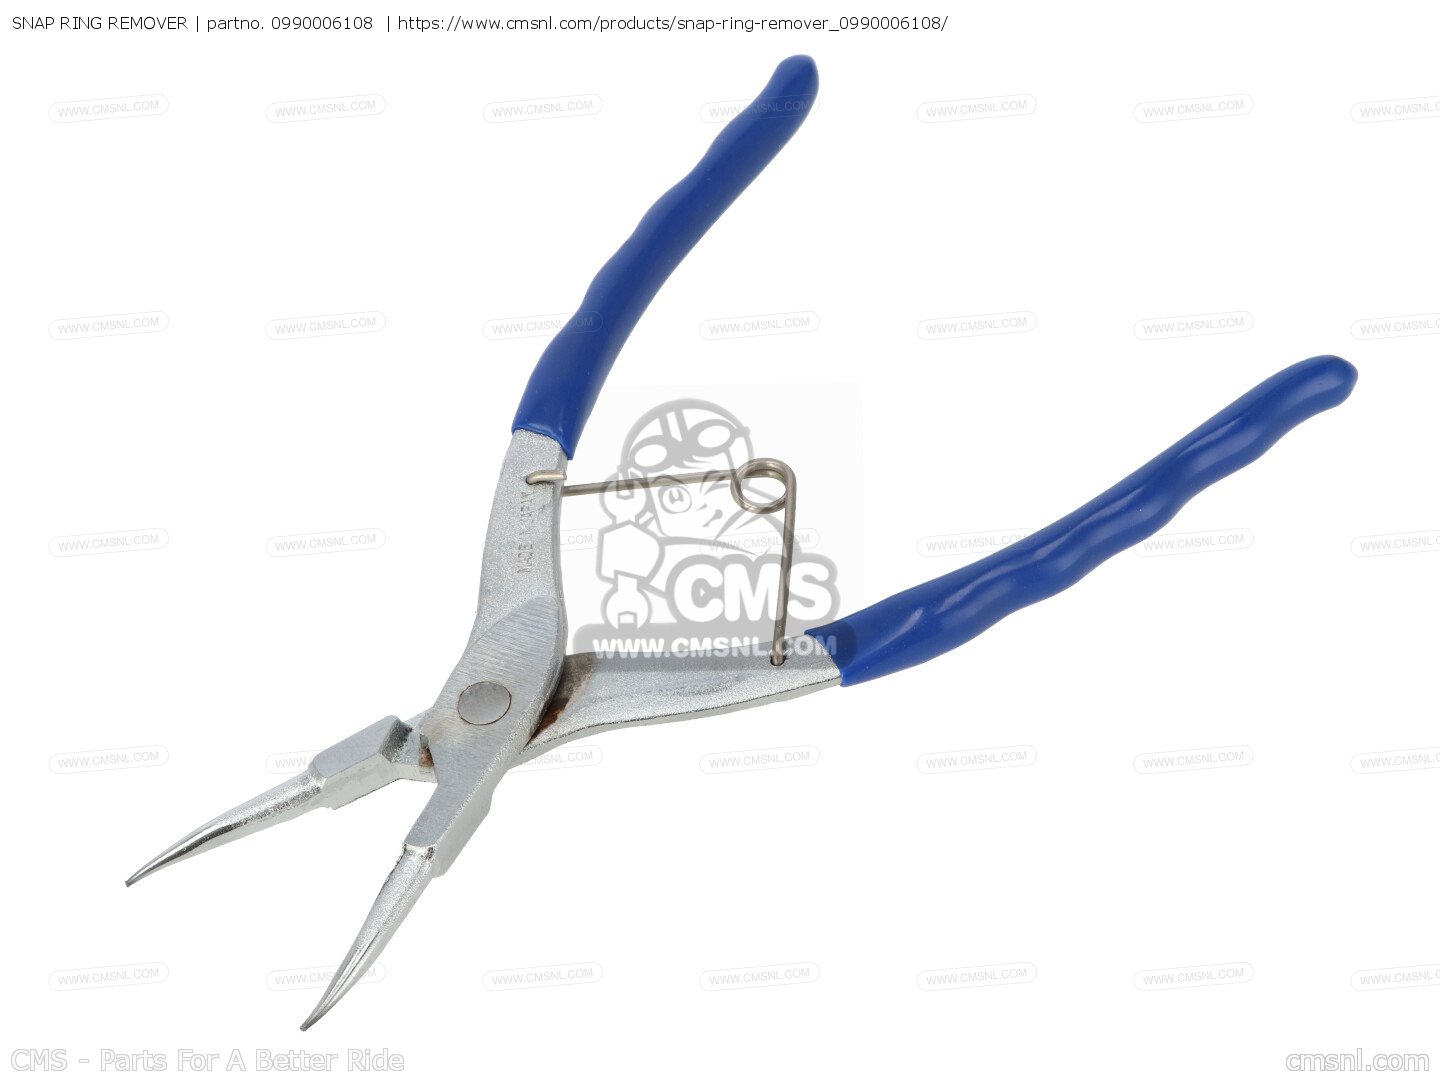 0990006108: Snap Ring Remover Suzuki - buy the 09900-06108 at CMSNL